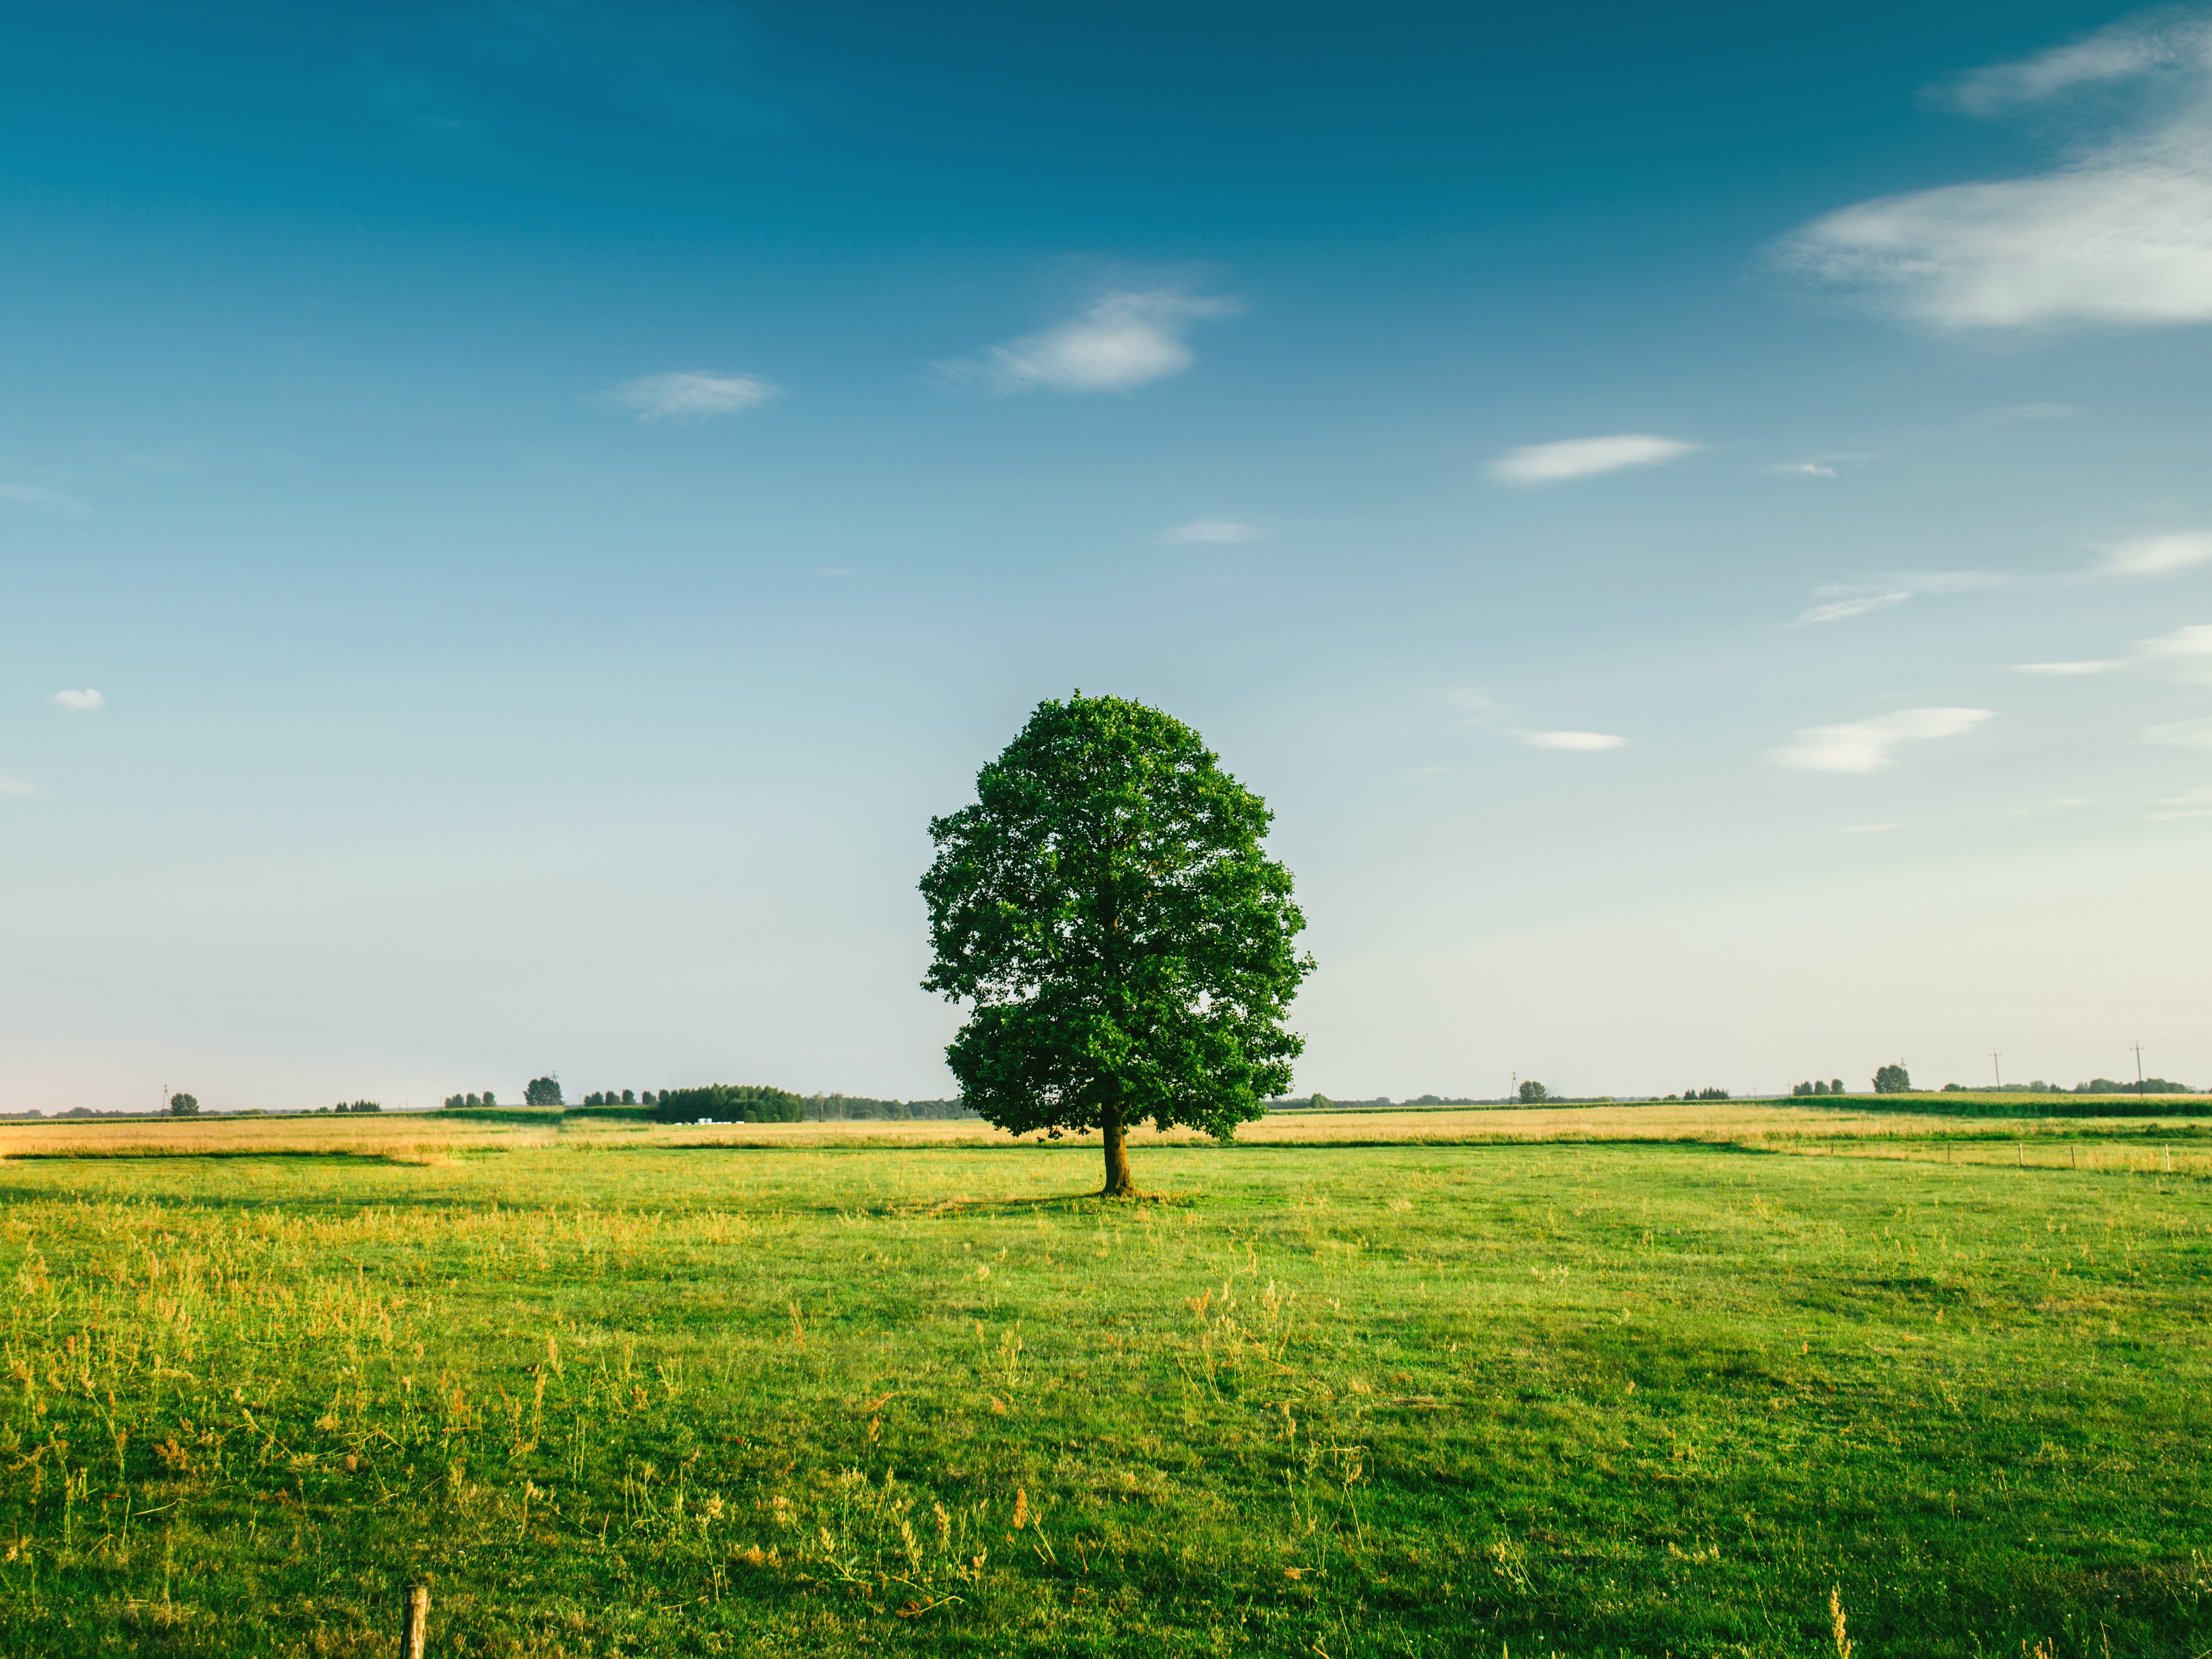 Tall Tree on the Middle of Green Grass Field during Daytime, Clouds, Countryside, Field, Grass, HQ Photo